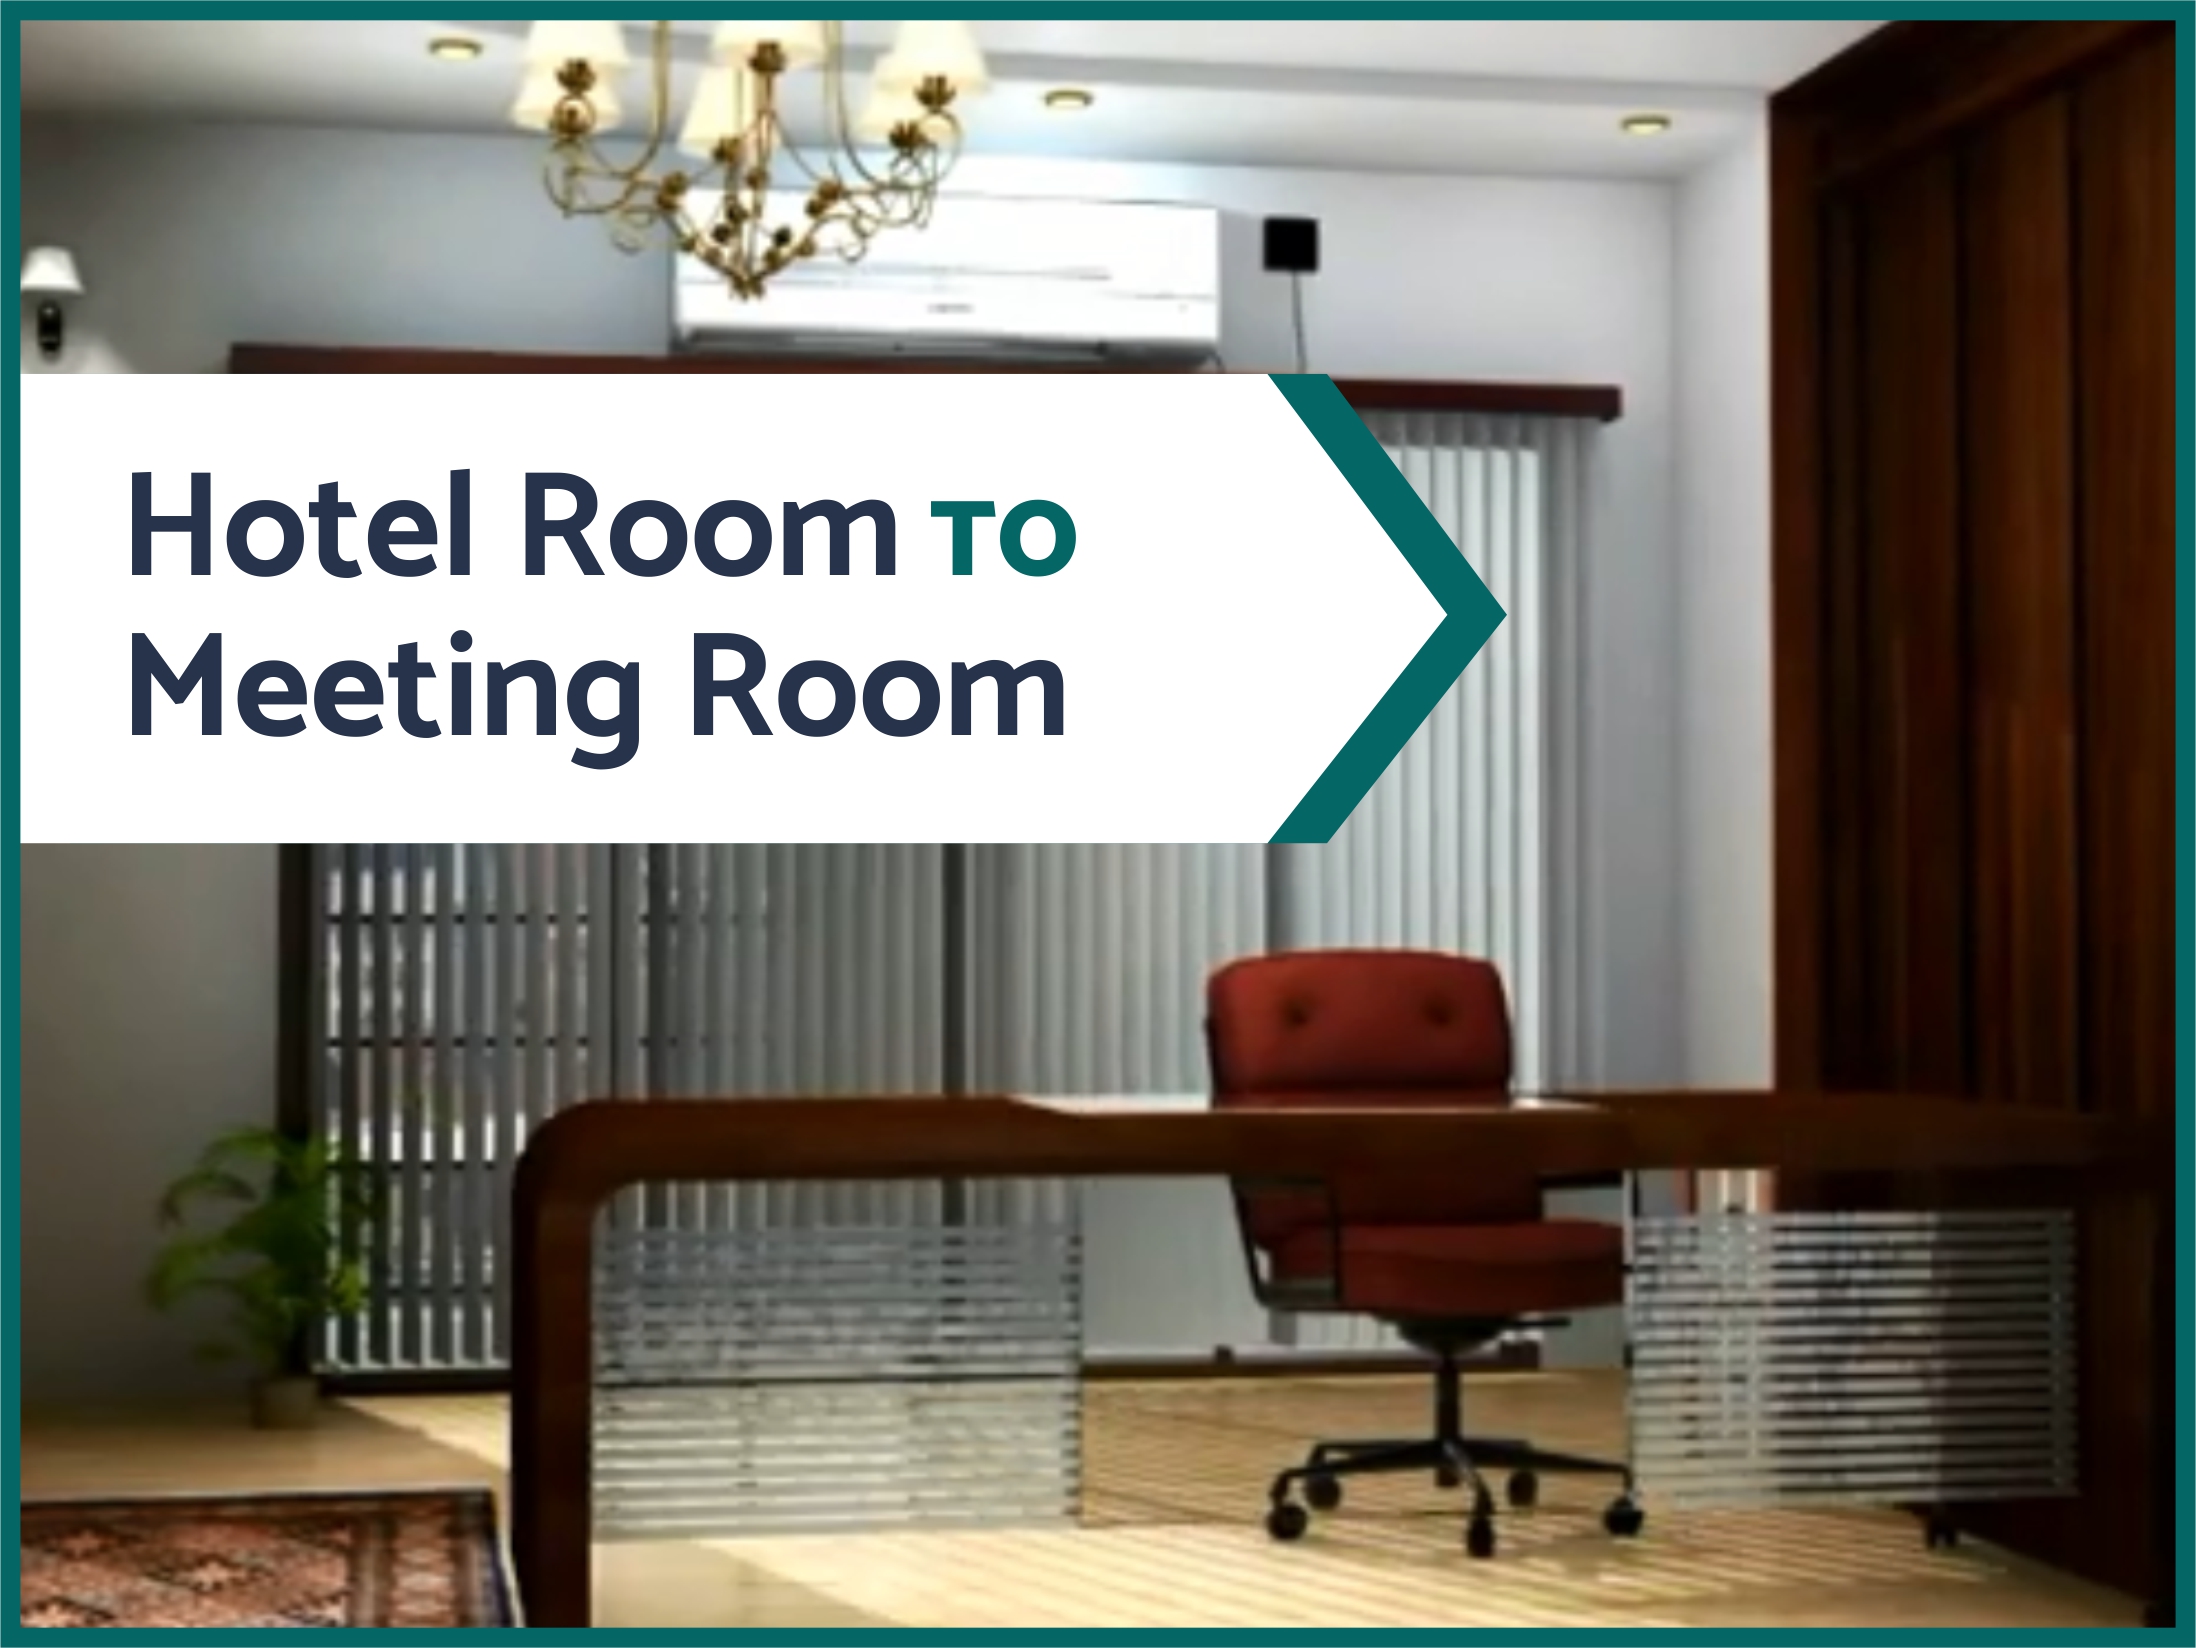 Hotel Room to Meeting Room